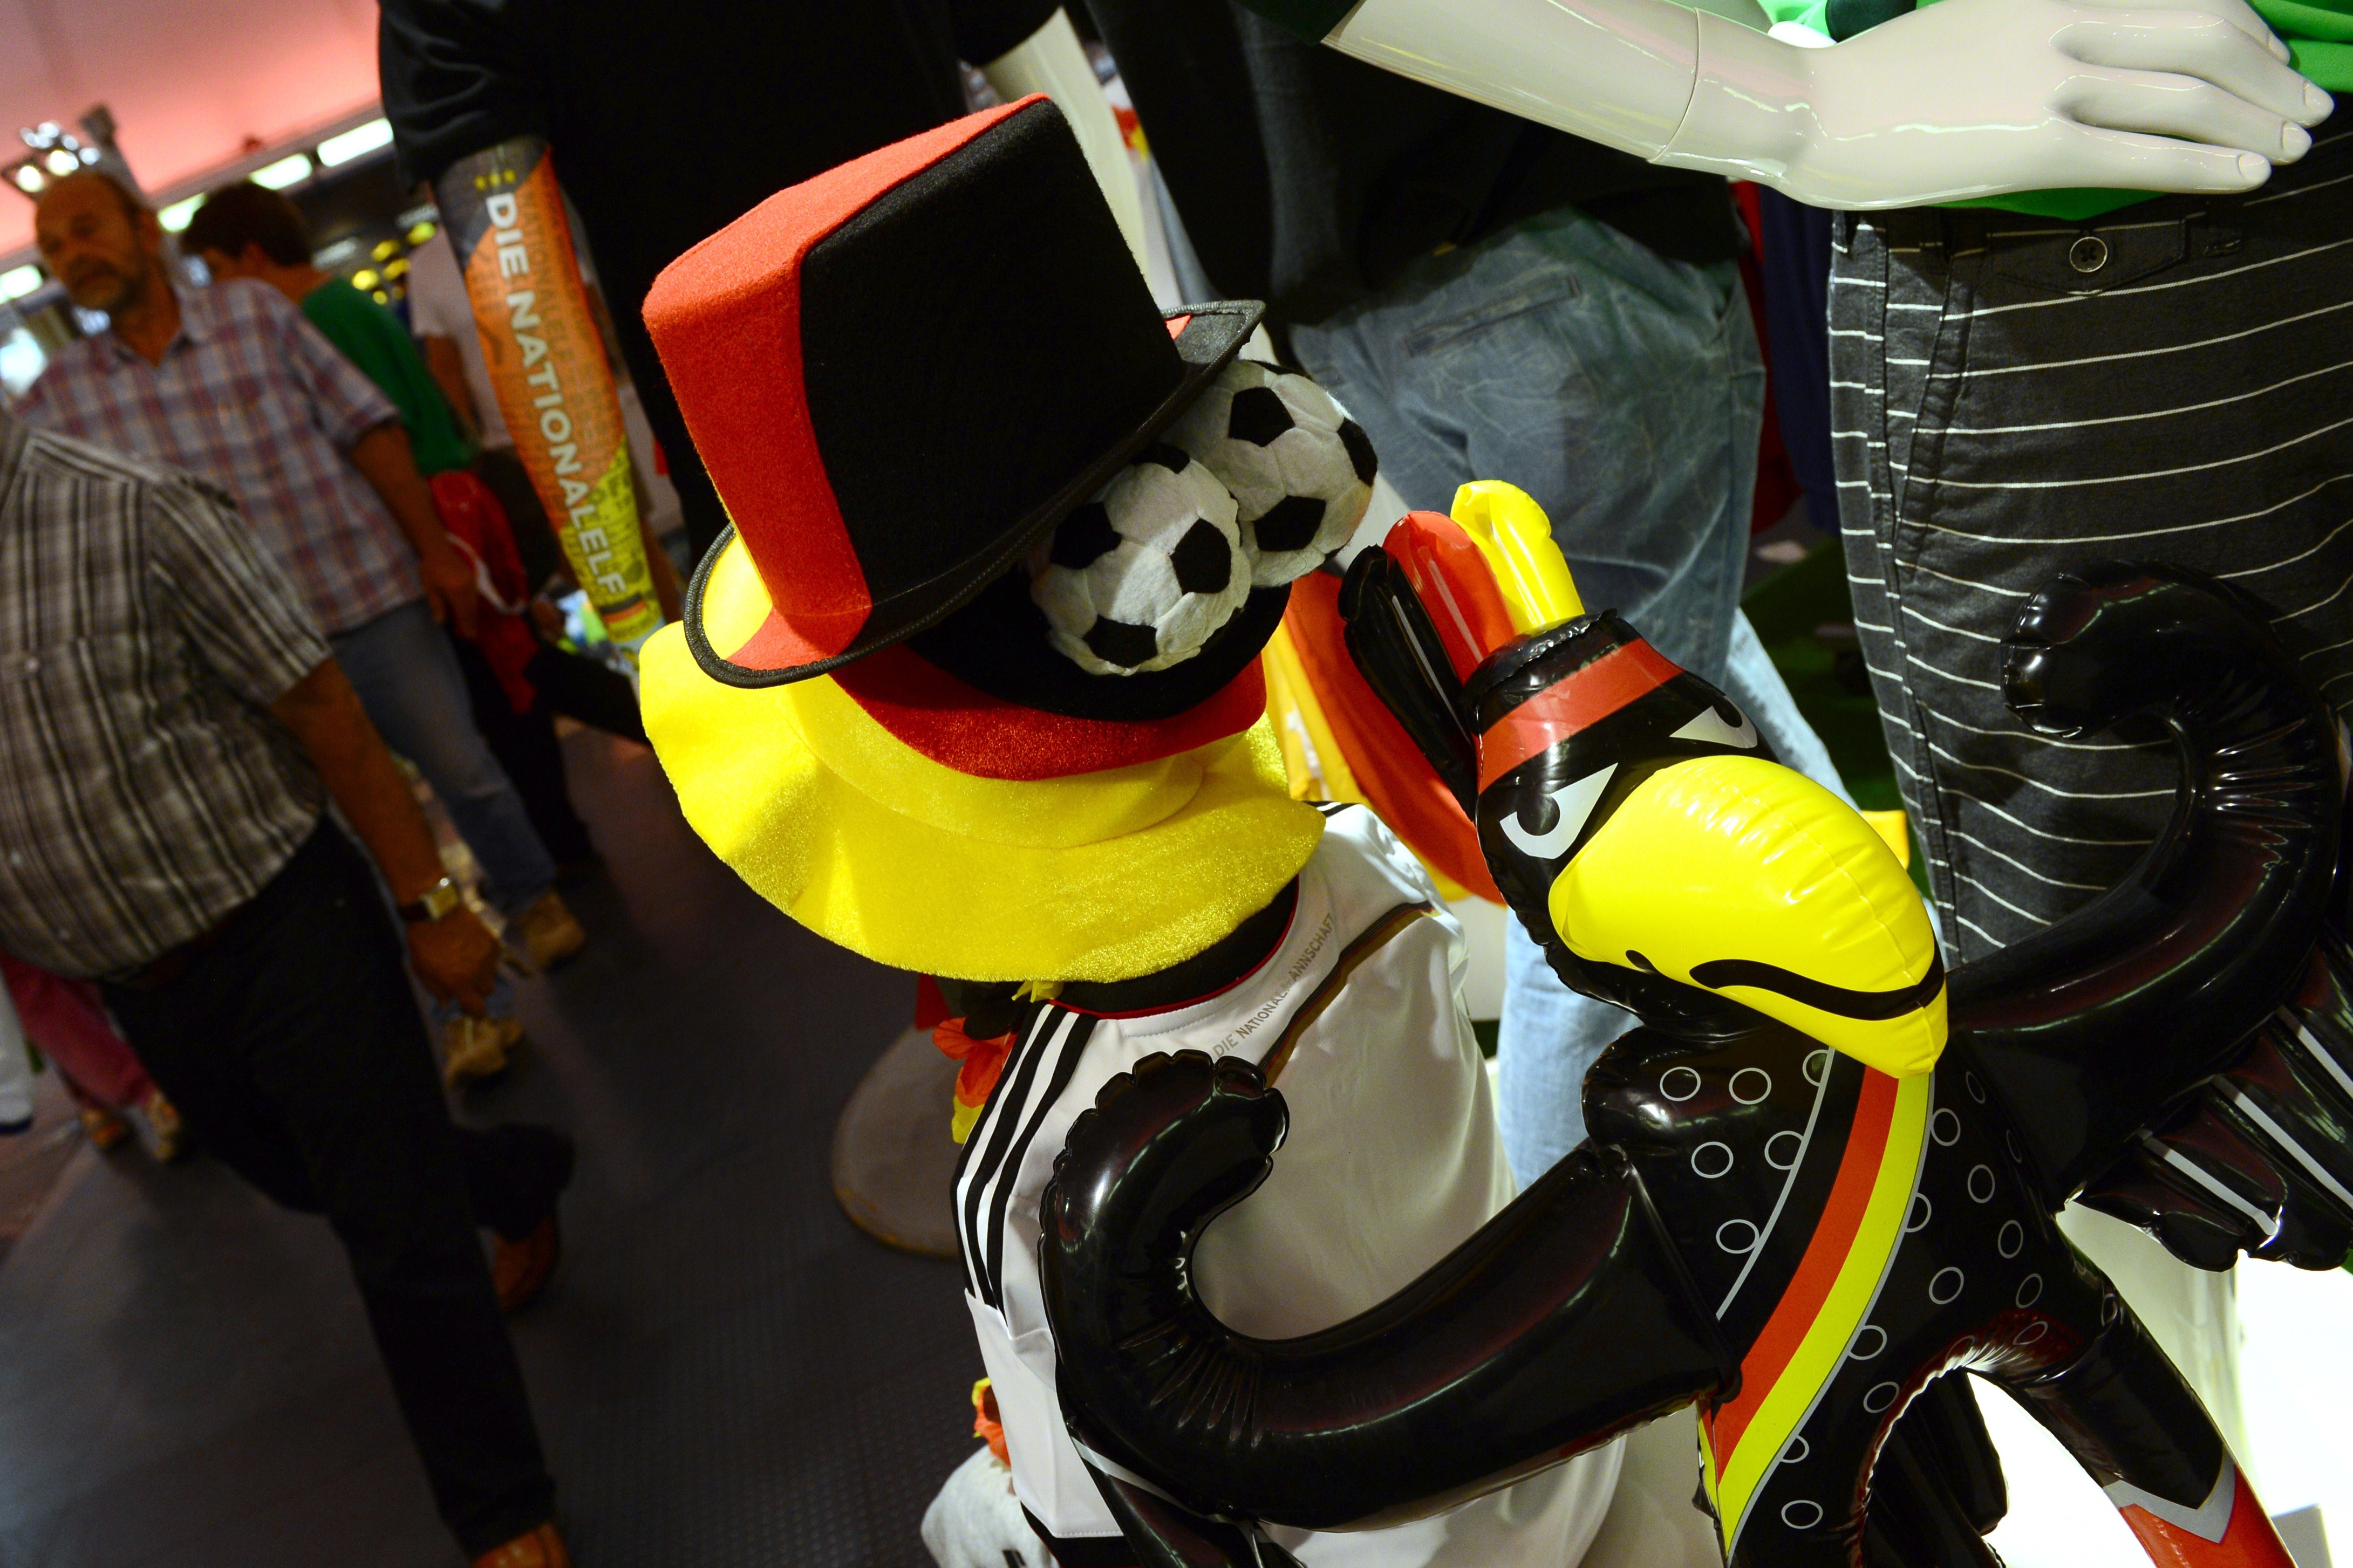 Outfits and fans accessories featuring the German national colours are on display at a Sports department store in Berlin on July 10, 2014, three days before the football World Cup 2014 final game between Germany and Argentina, to be played in Brazil. AFP PHOTO / JOHN MACDOUGALL